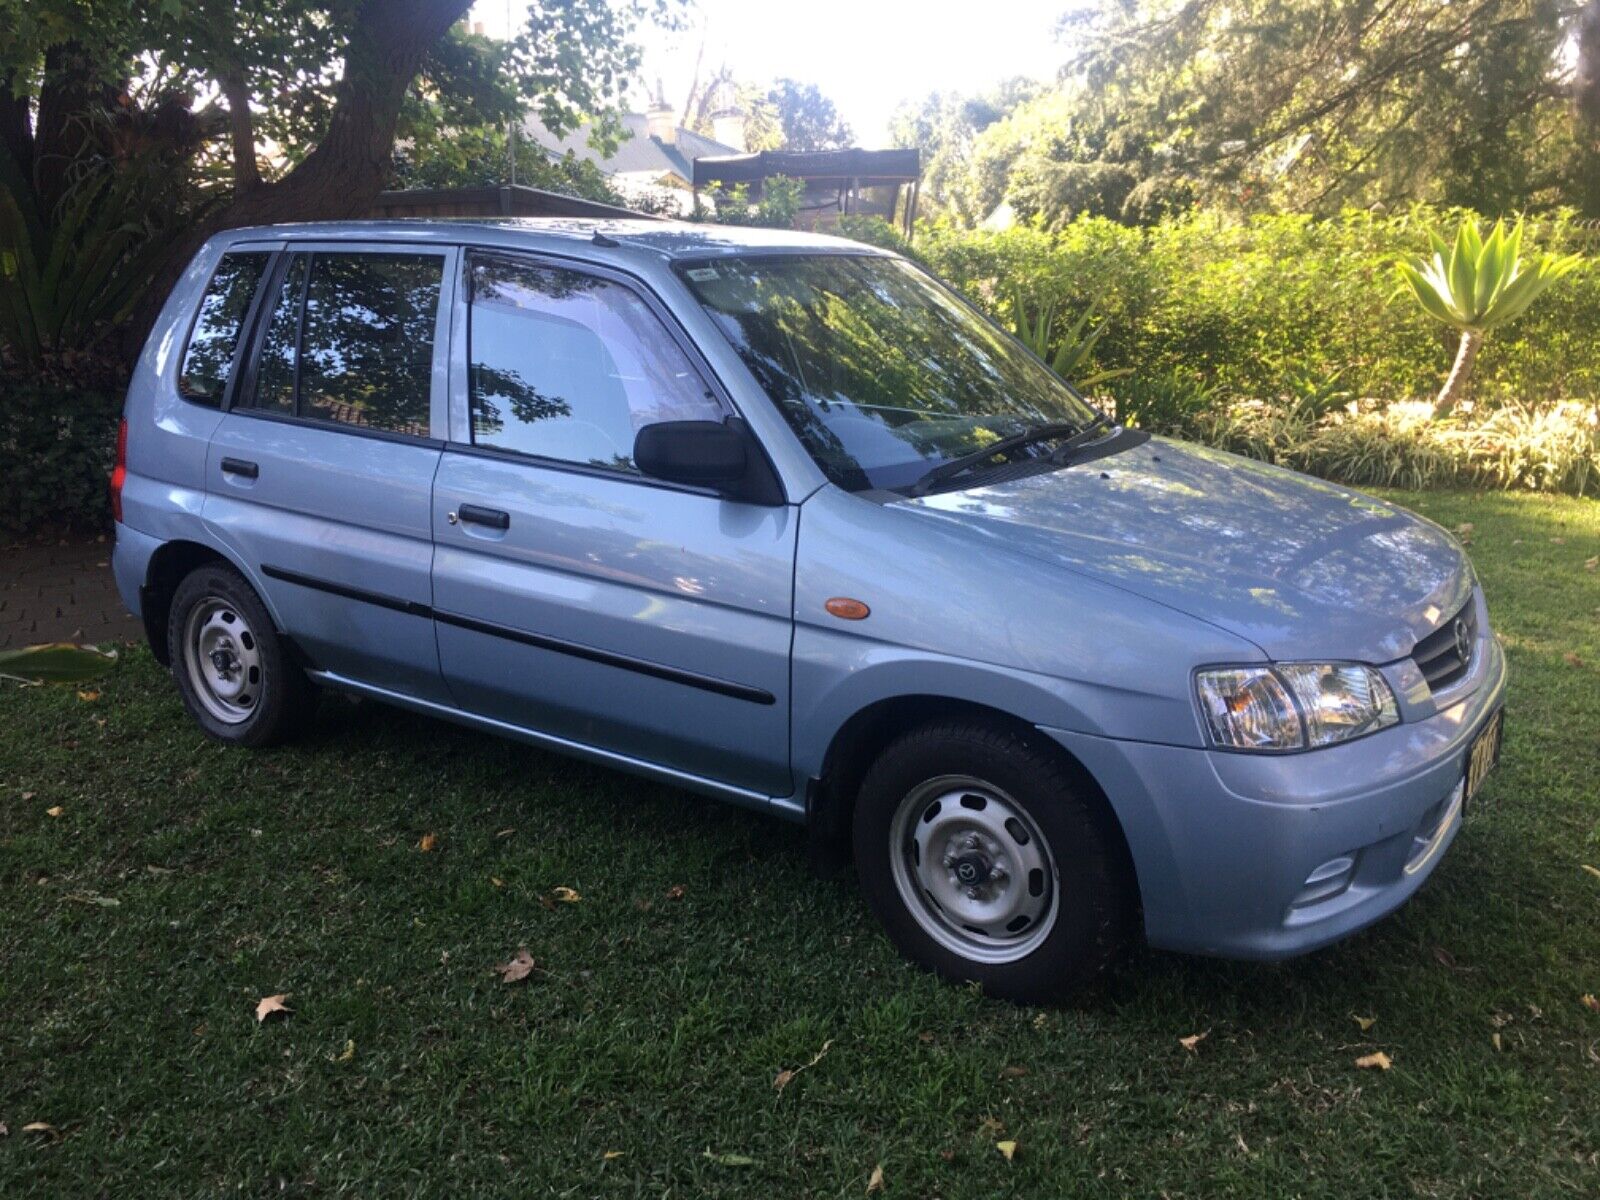 MAZDA 121 METRO SHADES-2001, MANUAL-only 50,000kms-94 YR OLD OWNER-CAMDEN NSW